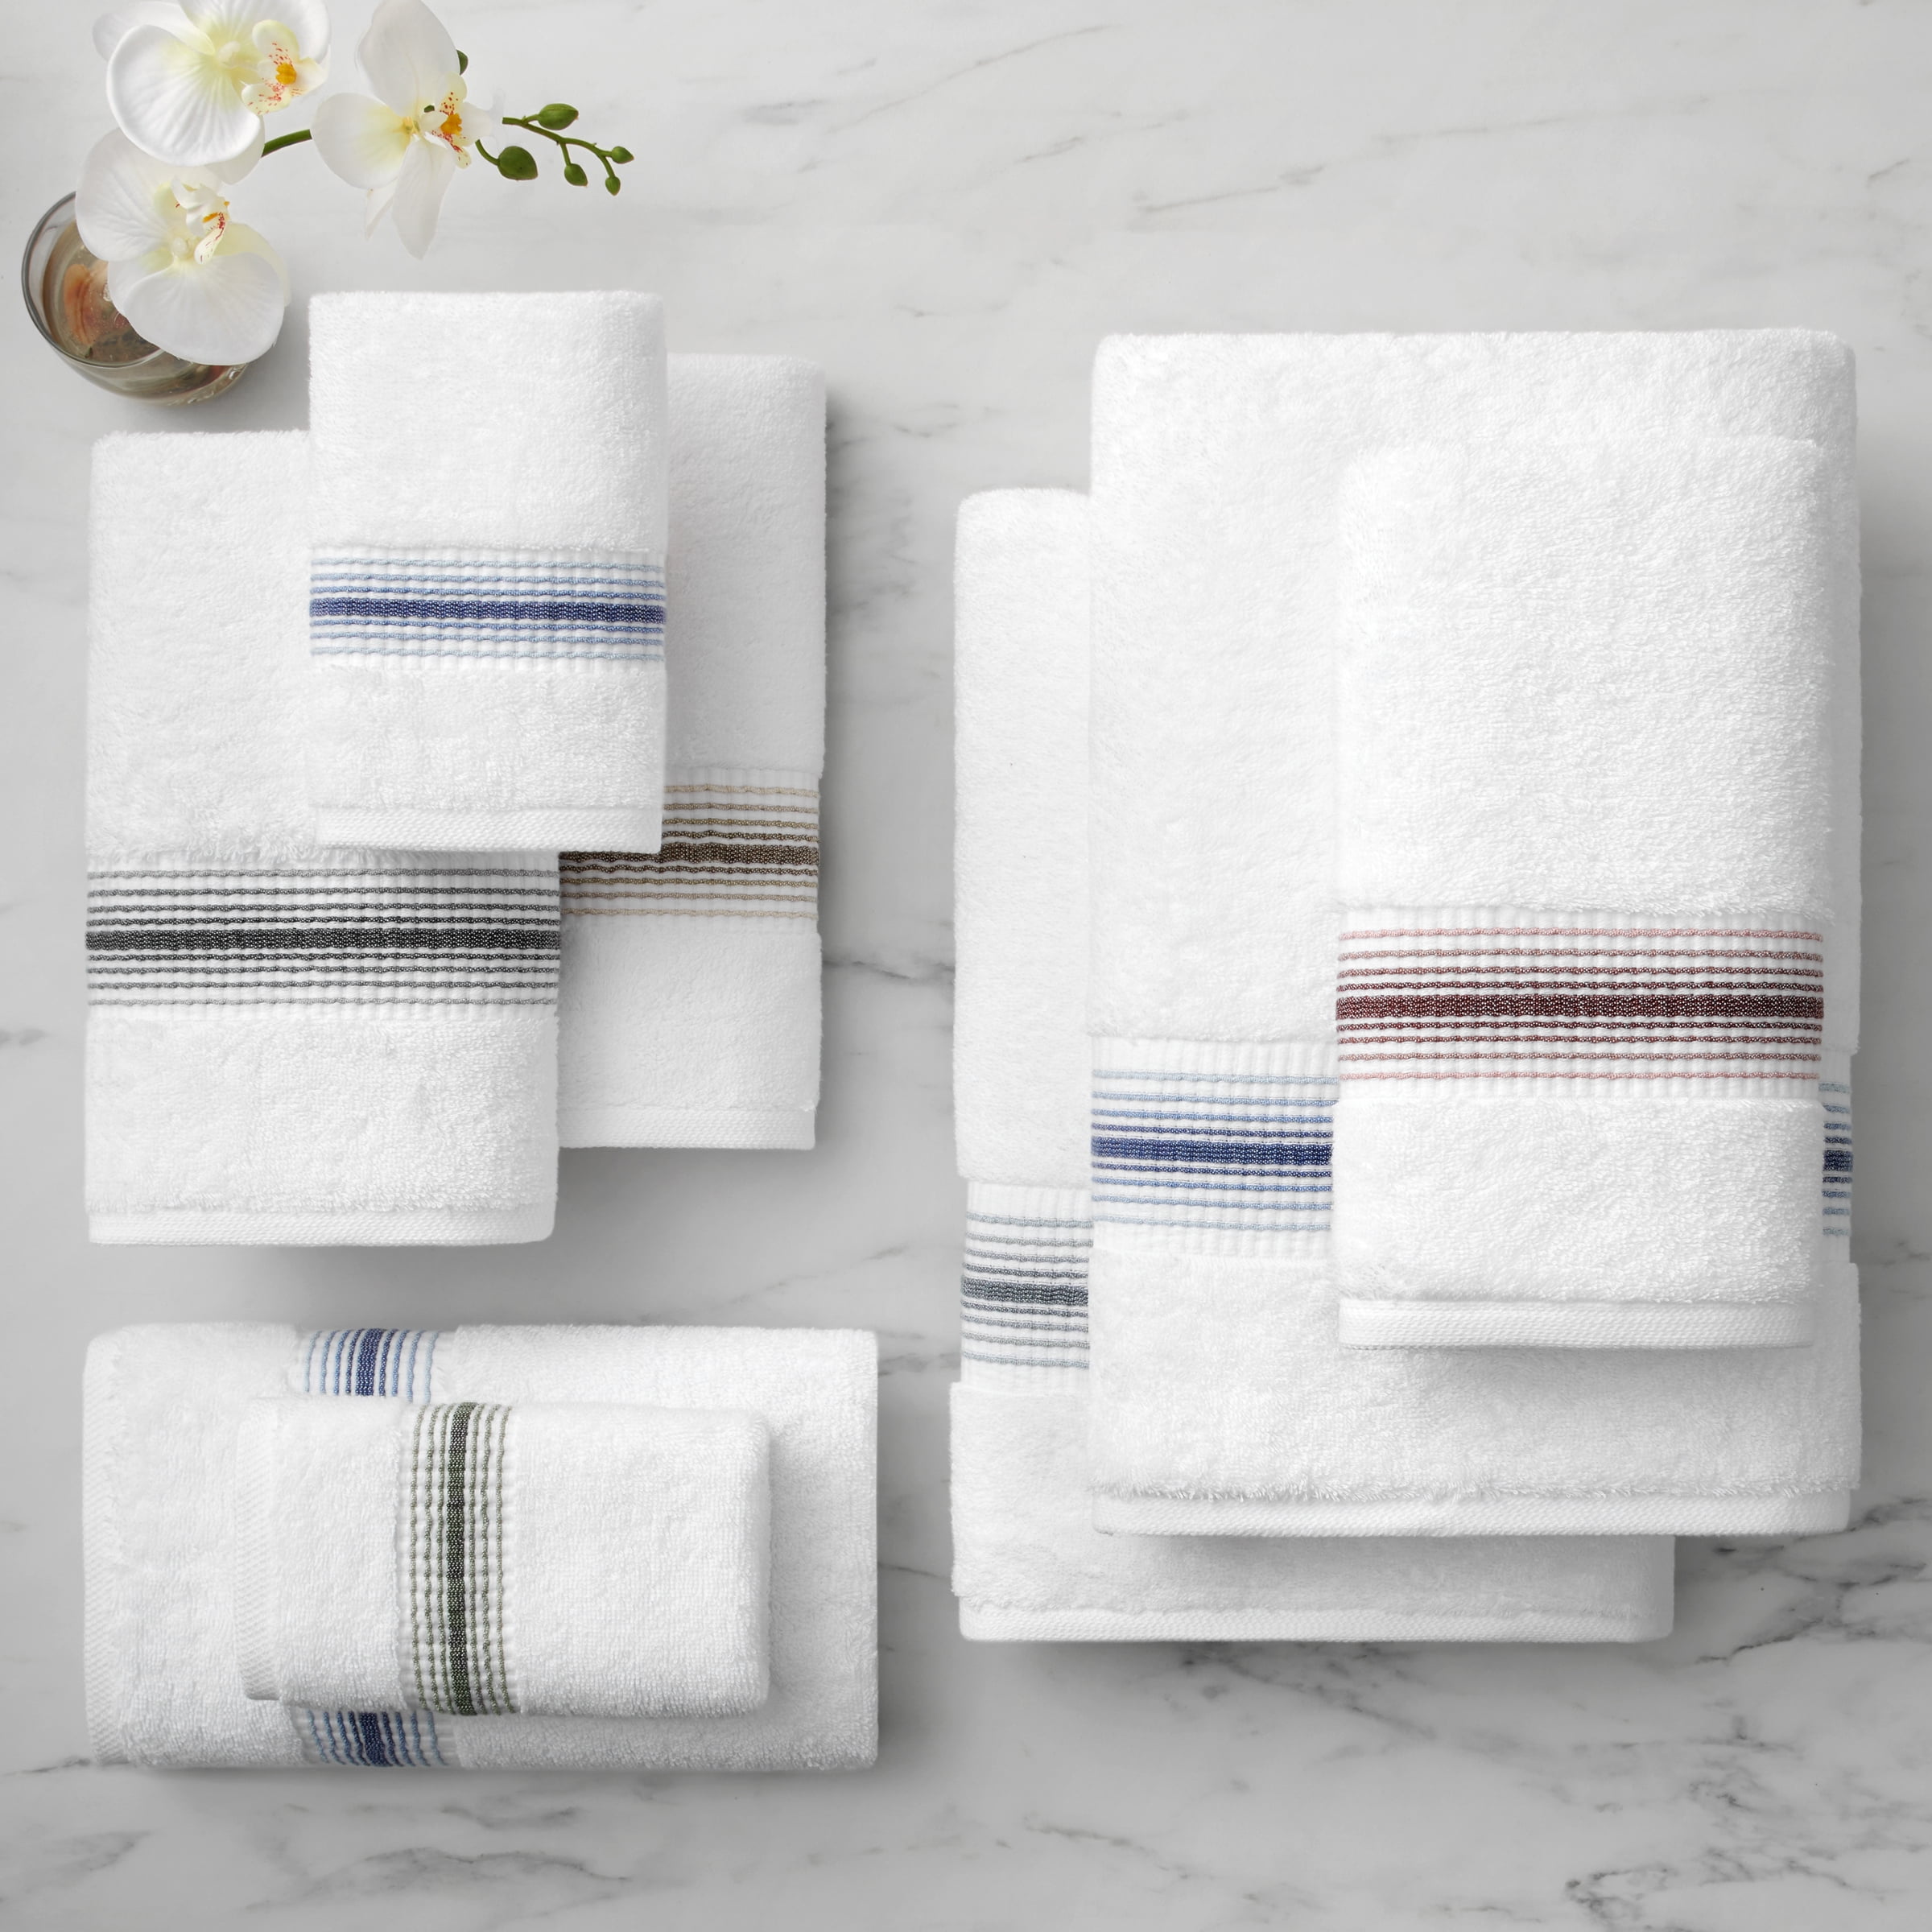 Aston and Arden Luxury Turkish Hand Towels, 4-Pack, 600 gsm, Extra Soft Plush, 18x32, Solid Color options with Dobby Border - White